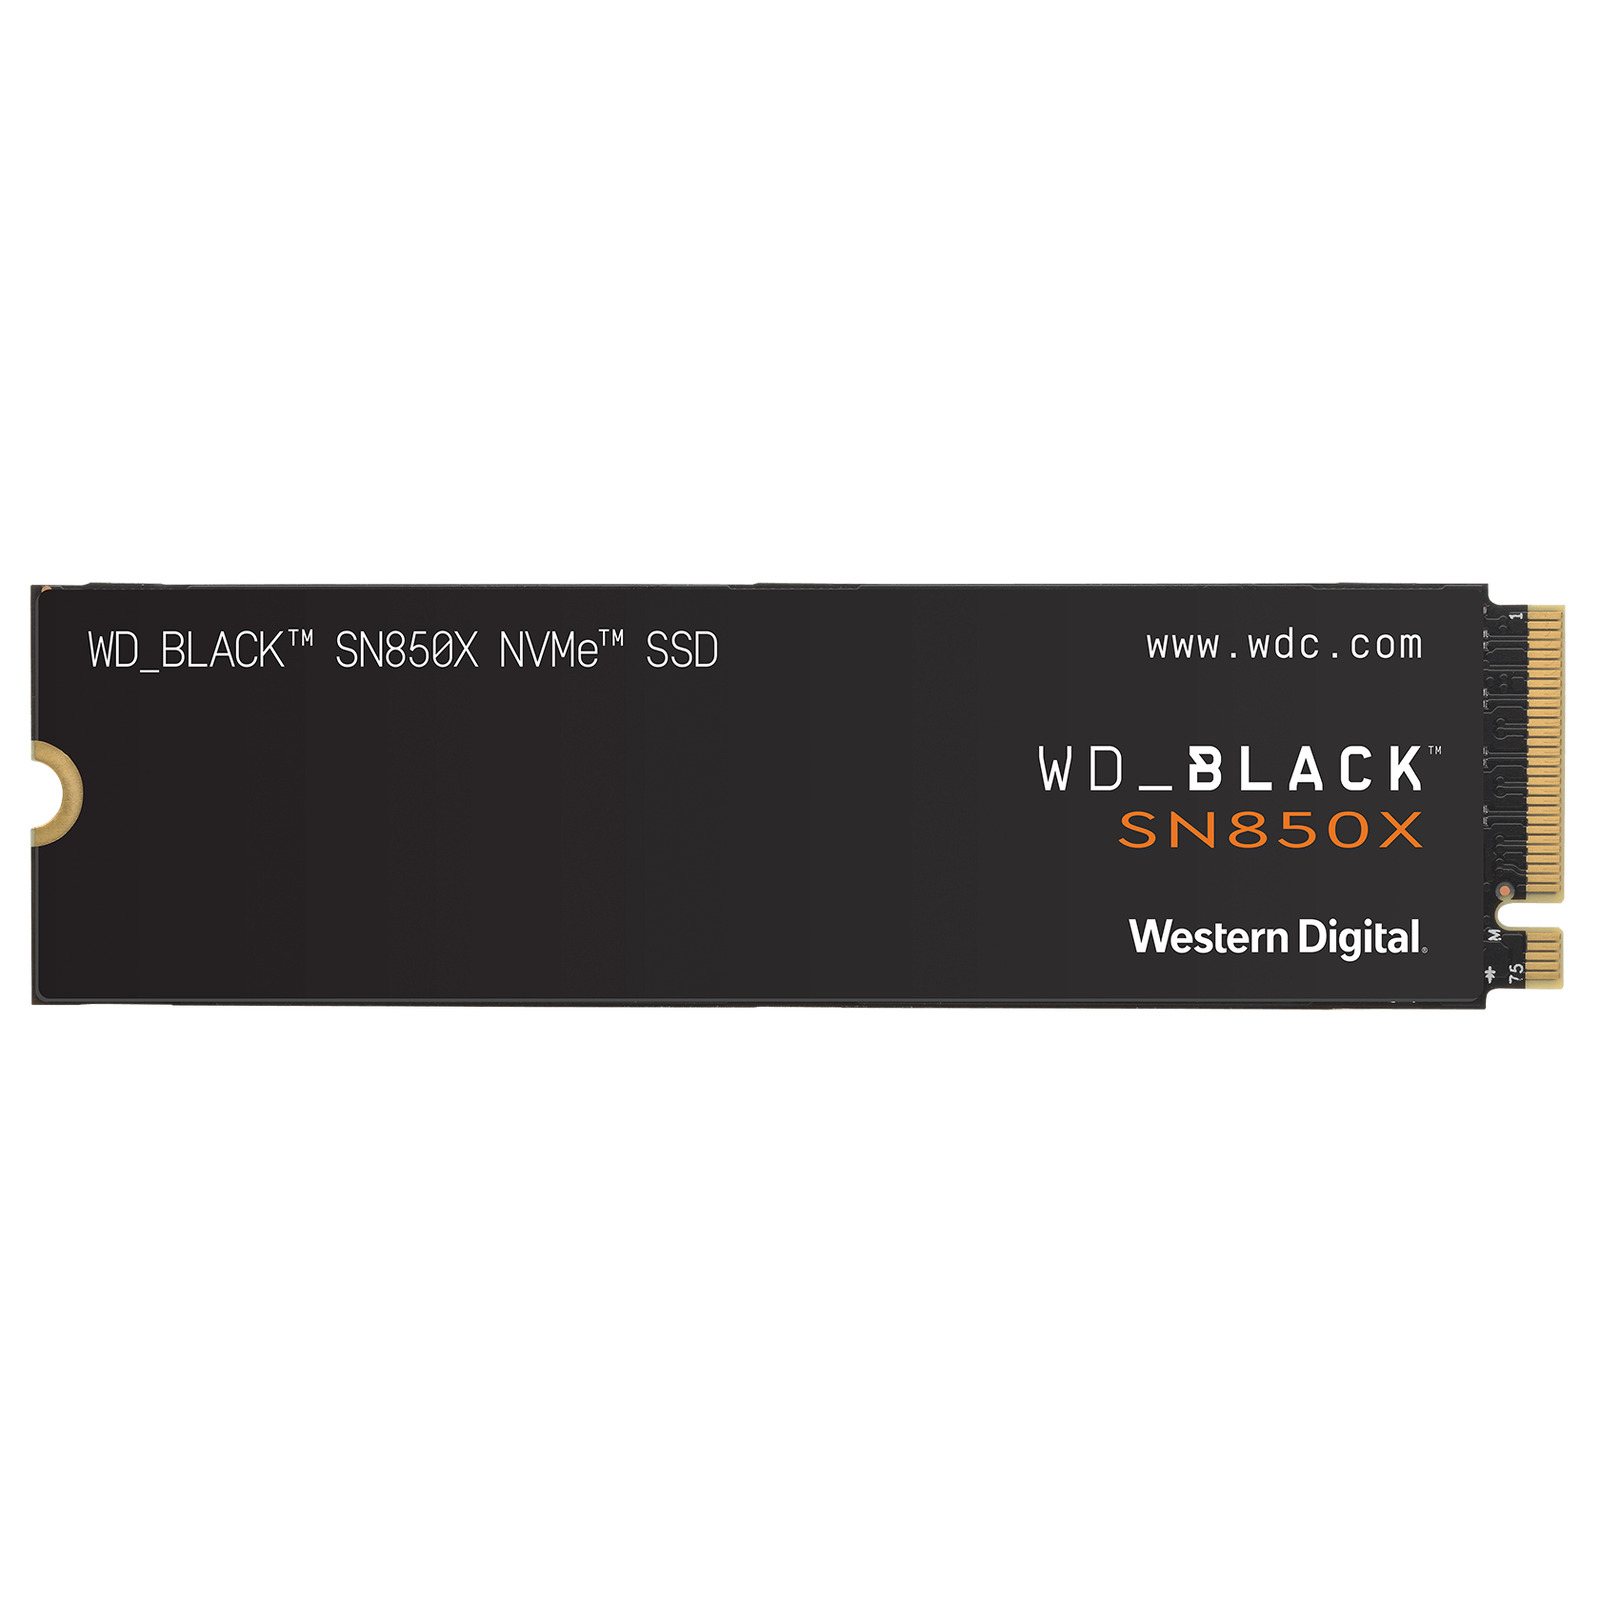 WD_BLACK 4TB SN850X NVMe SSD, Internal Gaming Solid State Drive - WDS400T2X0E